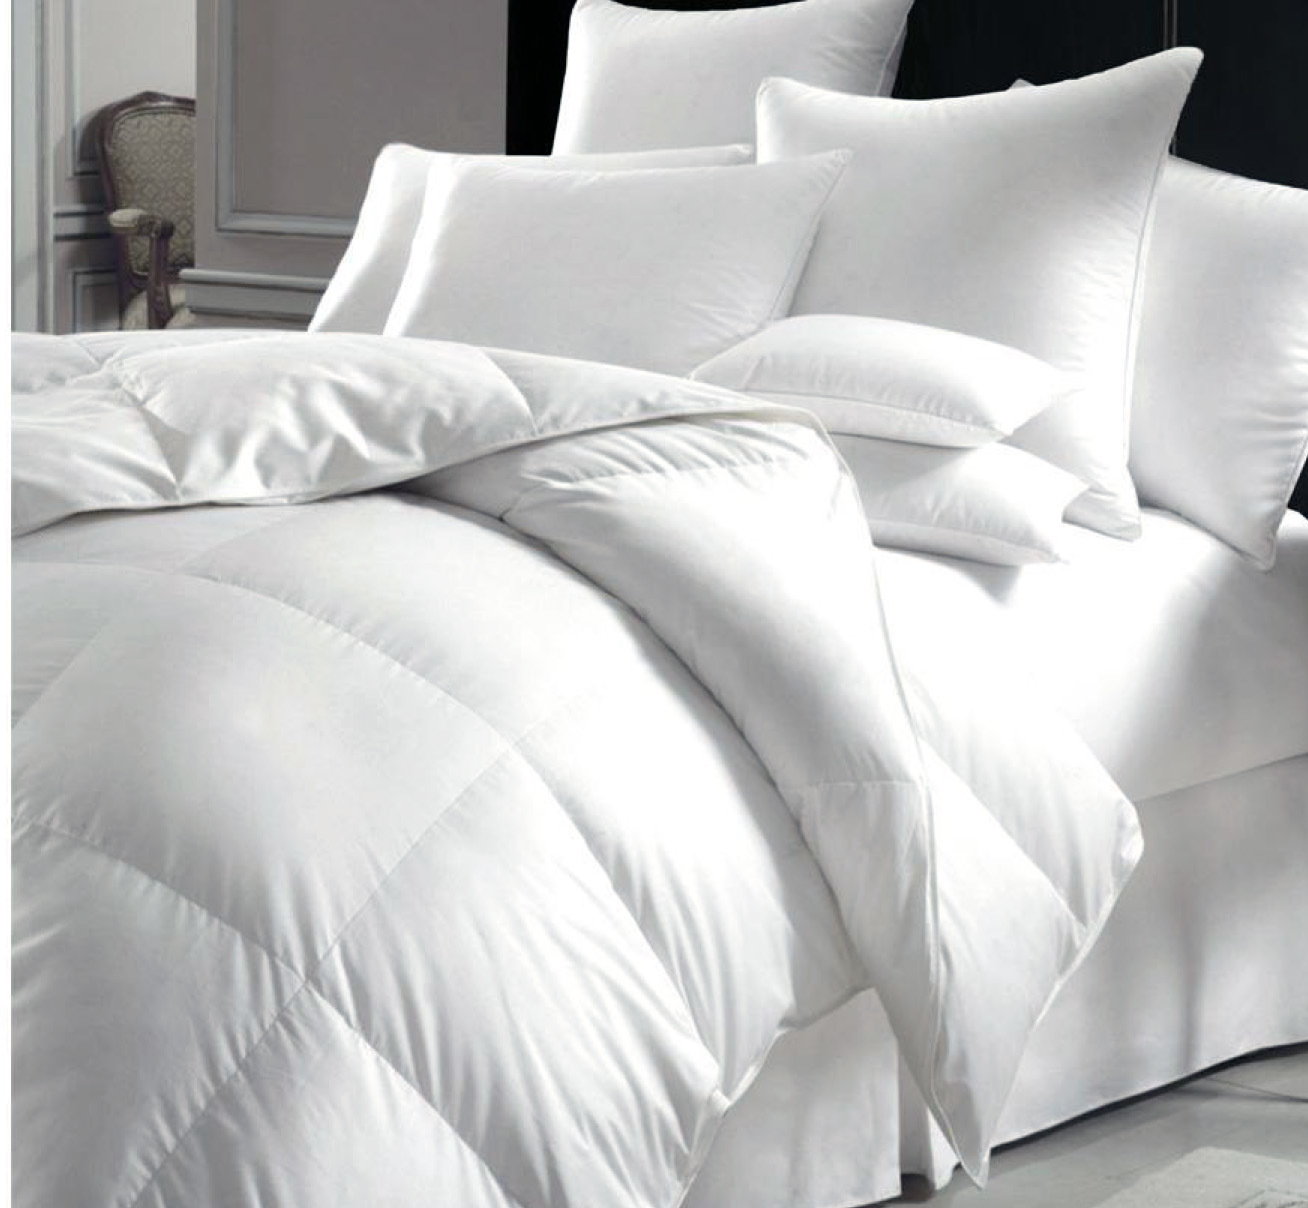 Crafted with The Finest Quality Hypoallergenic Polyester Comforter